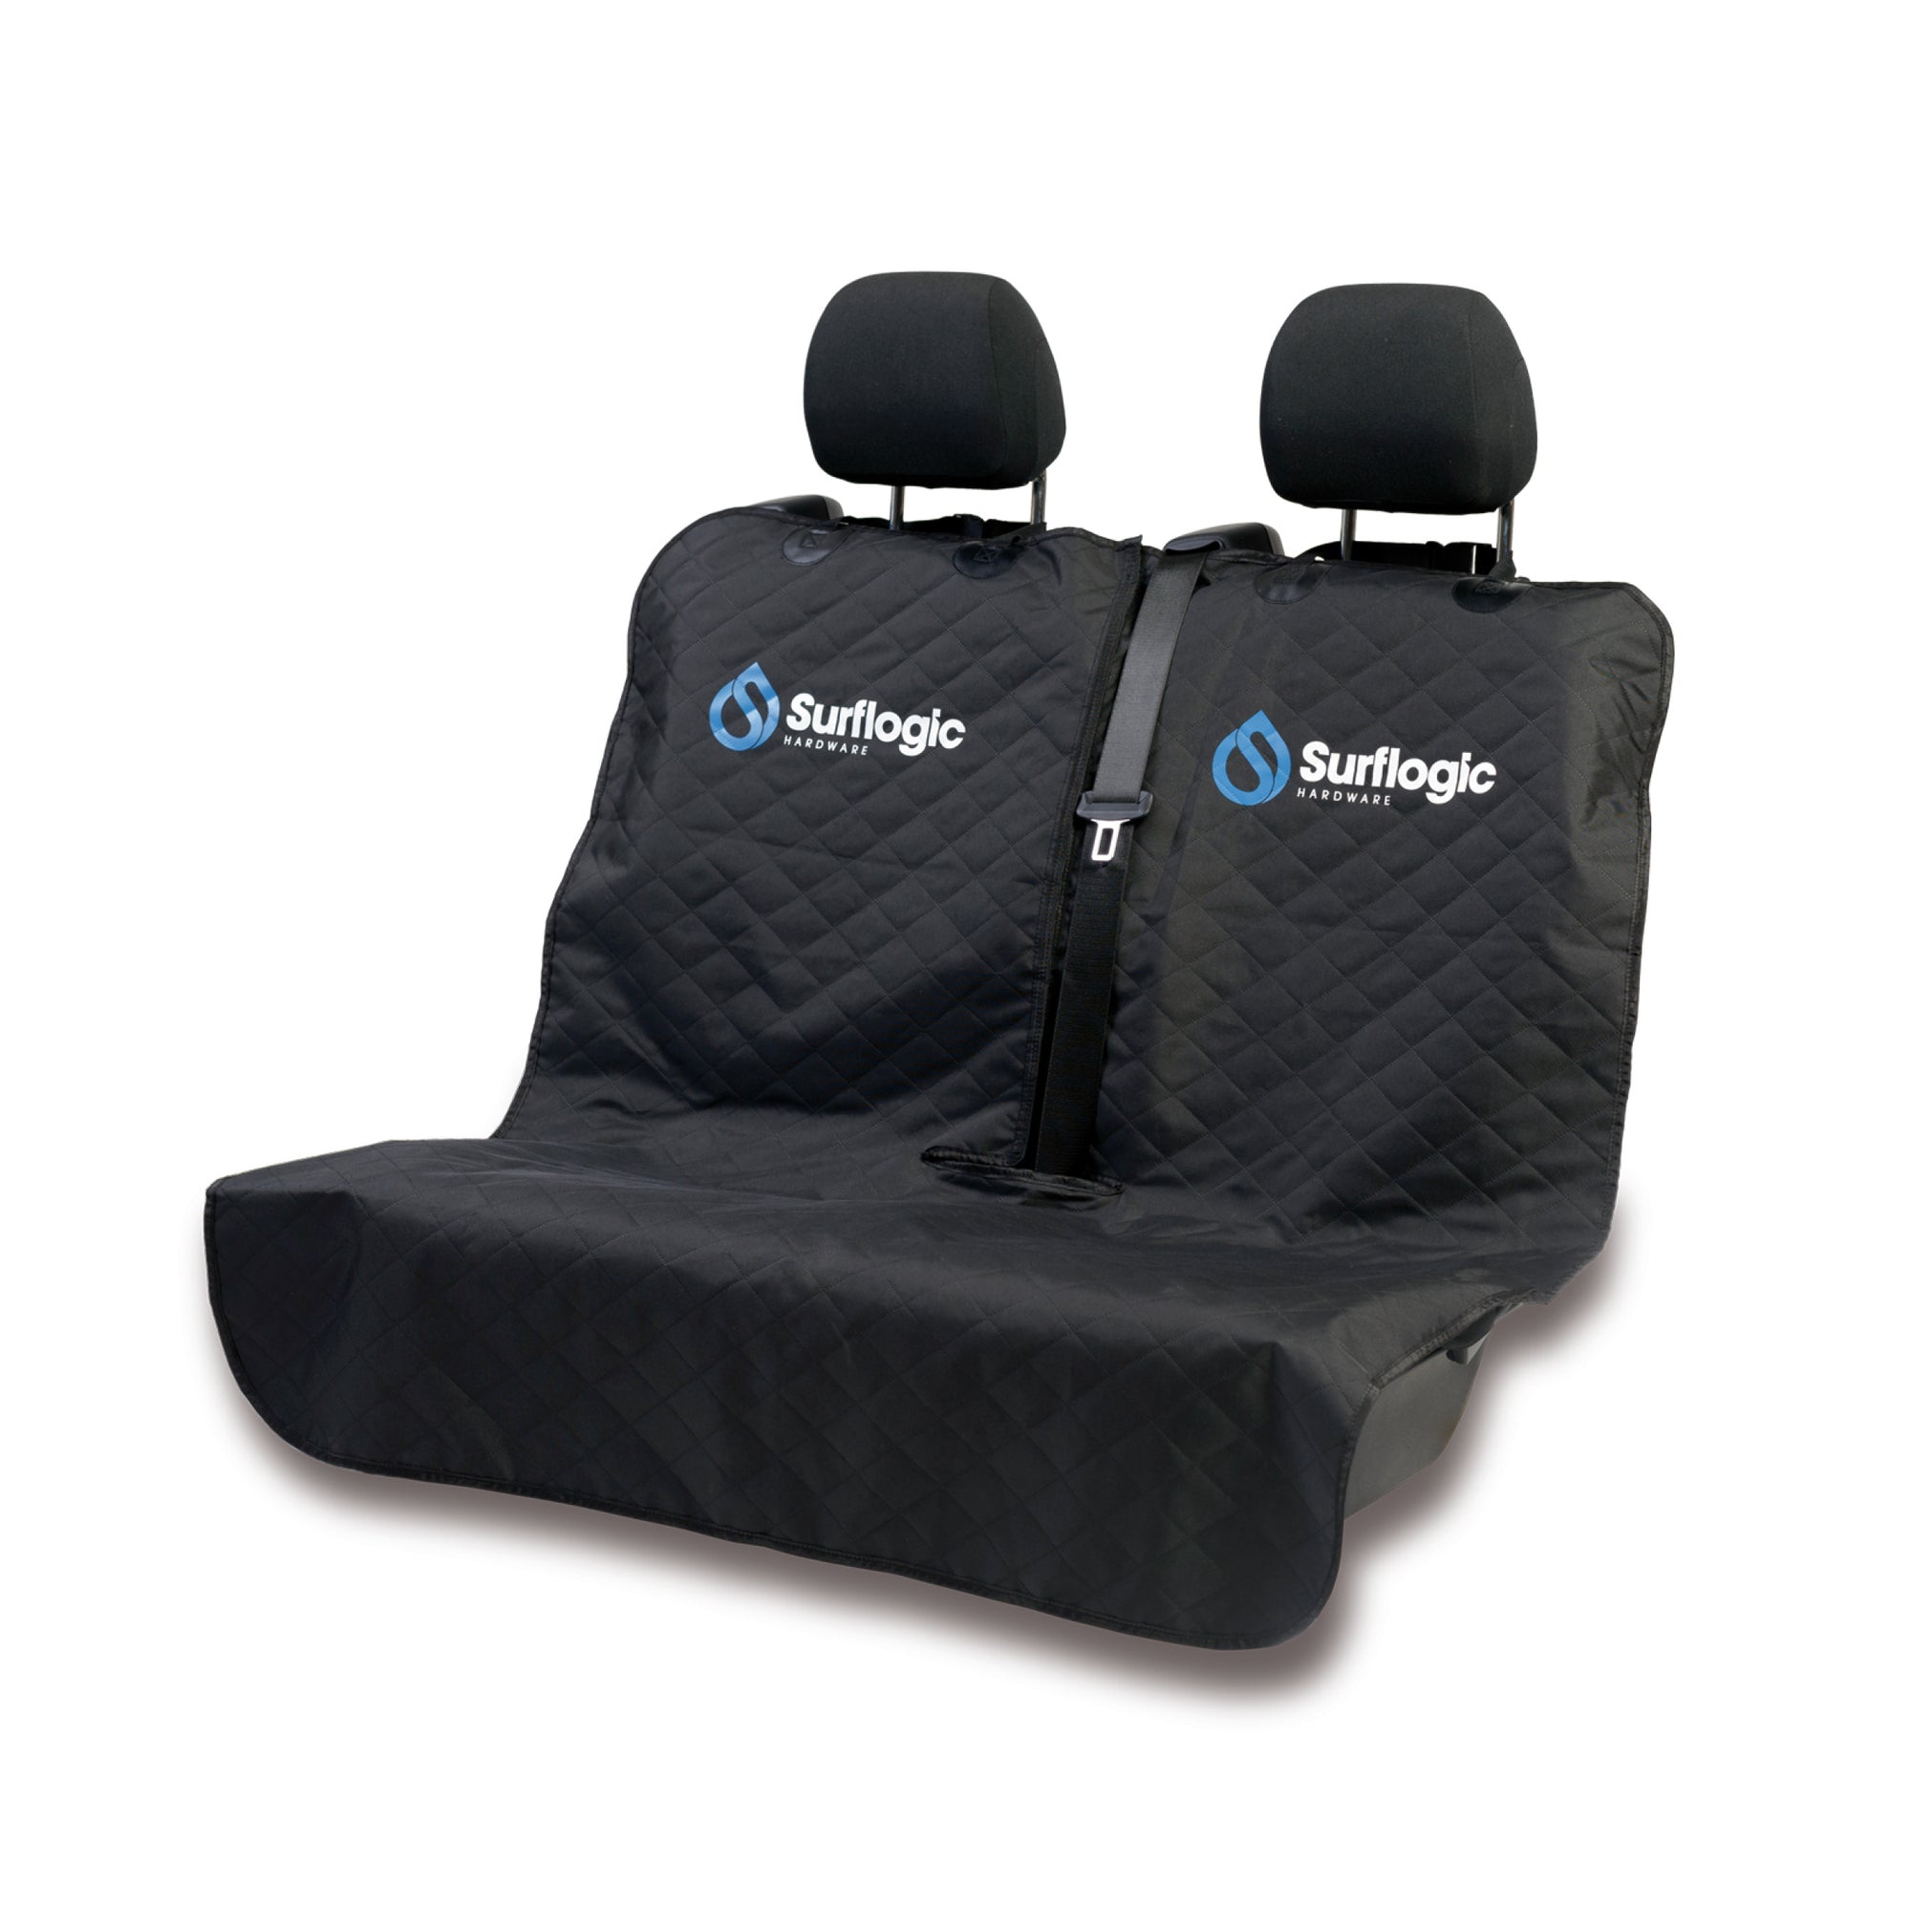 Surflogic Double Universal Car Seat Cover